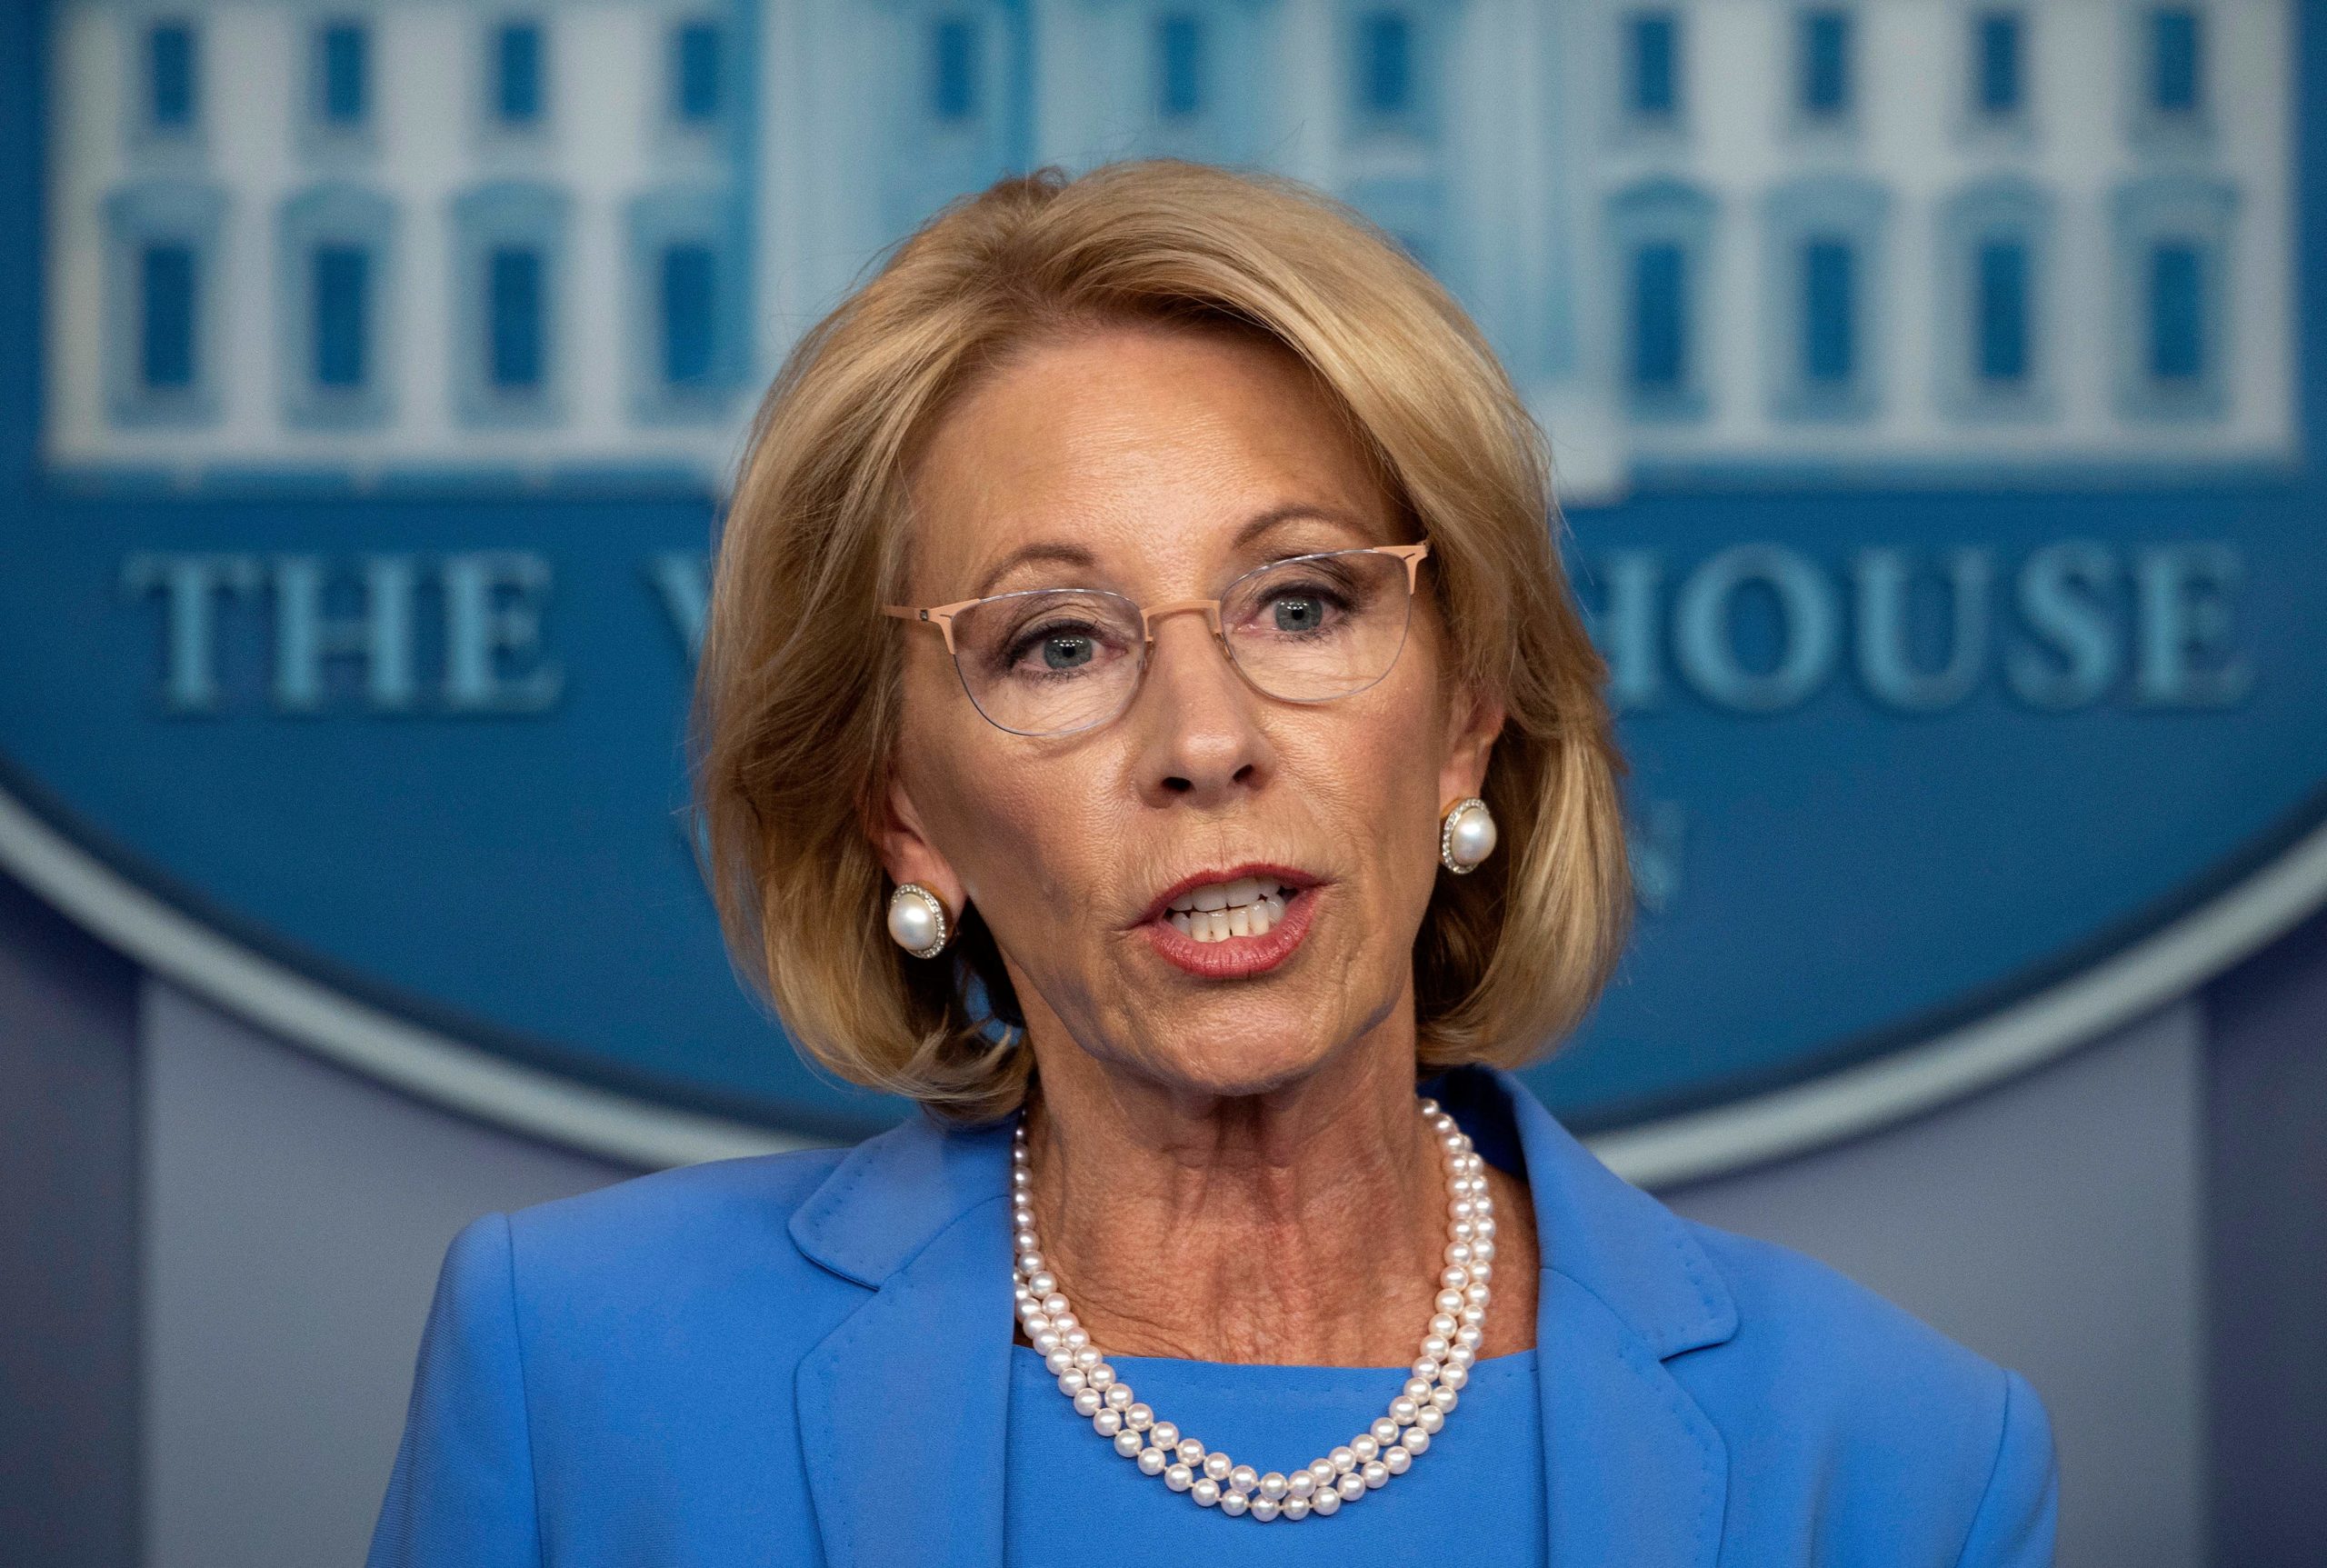 US Secretary of Education Betsy Devos speaks during the daily briefing on the novel coronavirus, COVID-19, in the Brady Briefing Room at the White House on March 27, 2020, in Washington, DC. (Photo by JIM WATSON / AFP) (Photo by JIM WATSON/AFP via Getty Images)